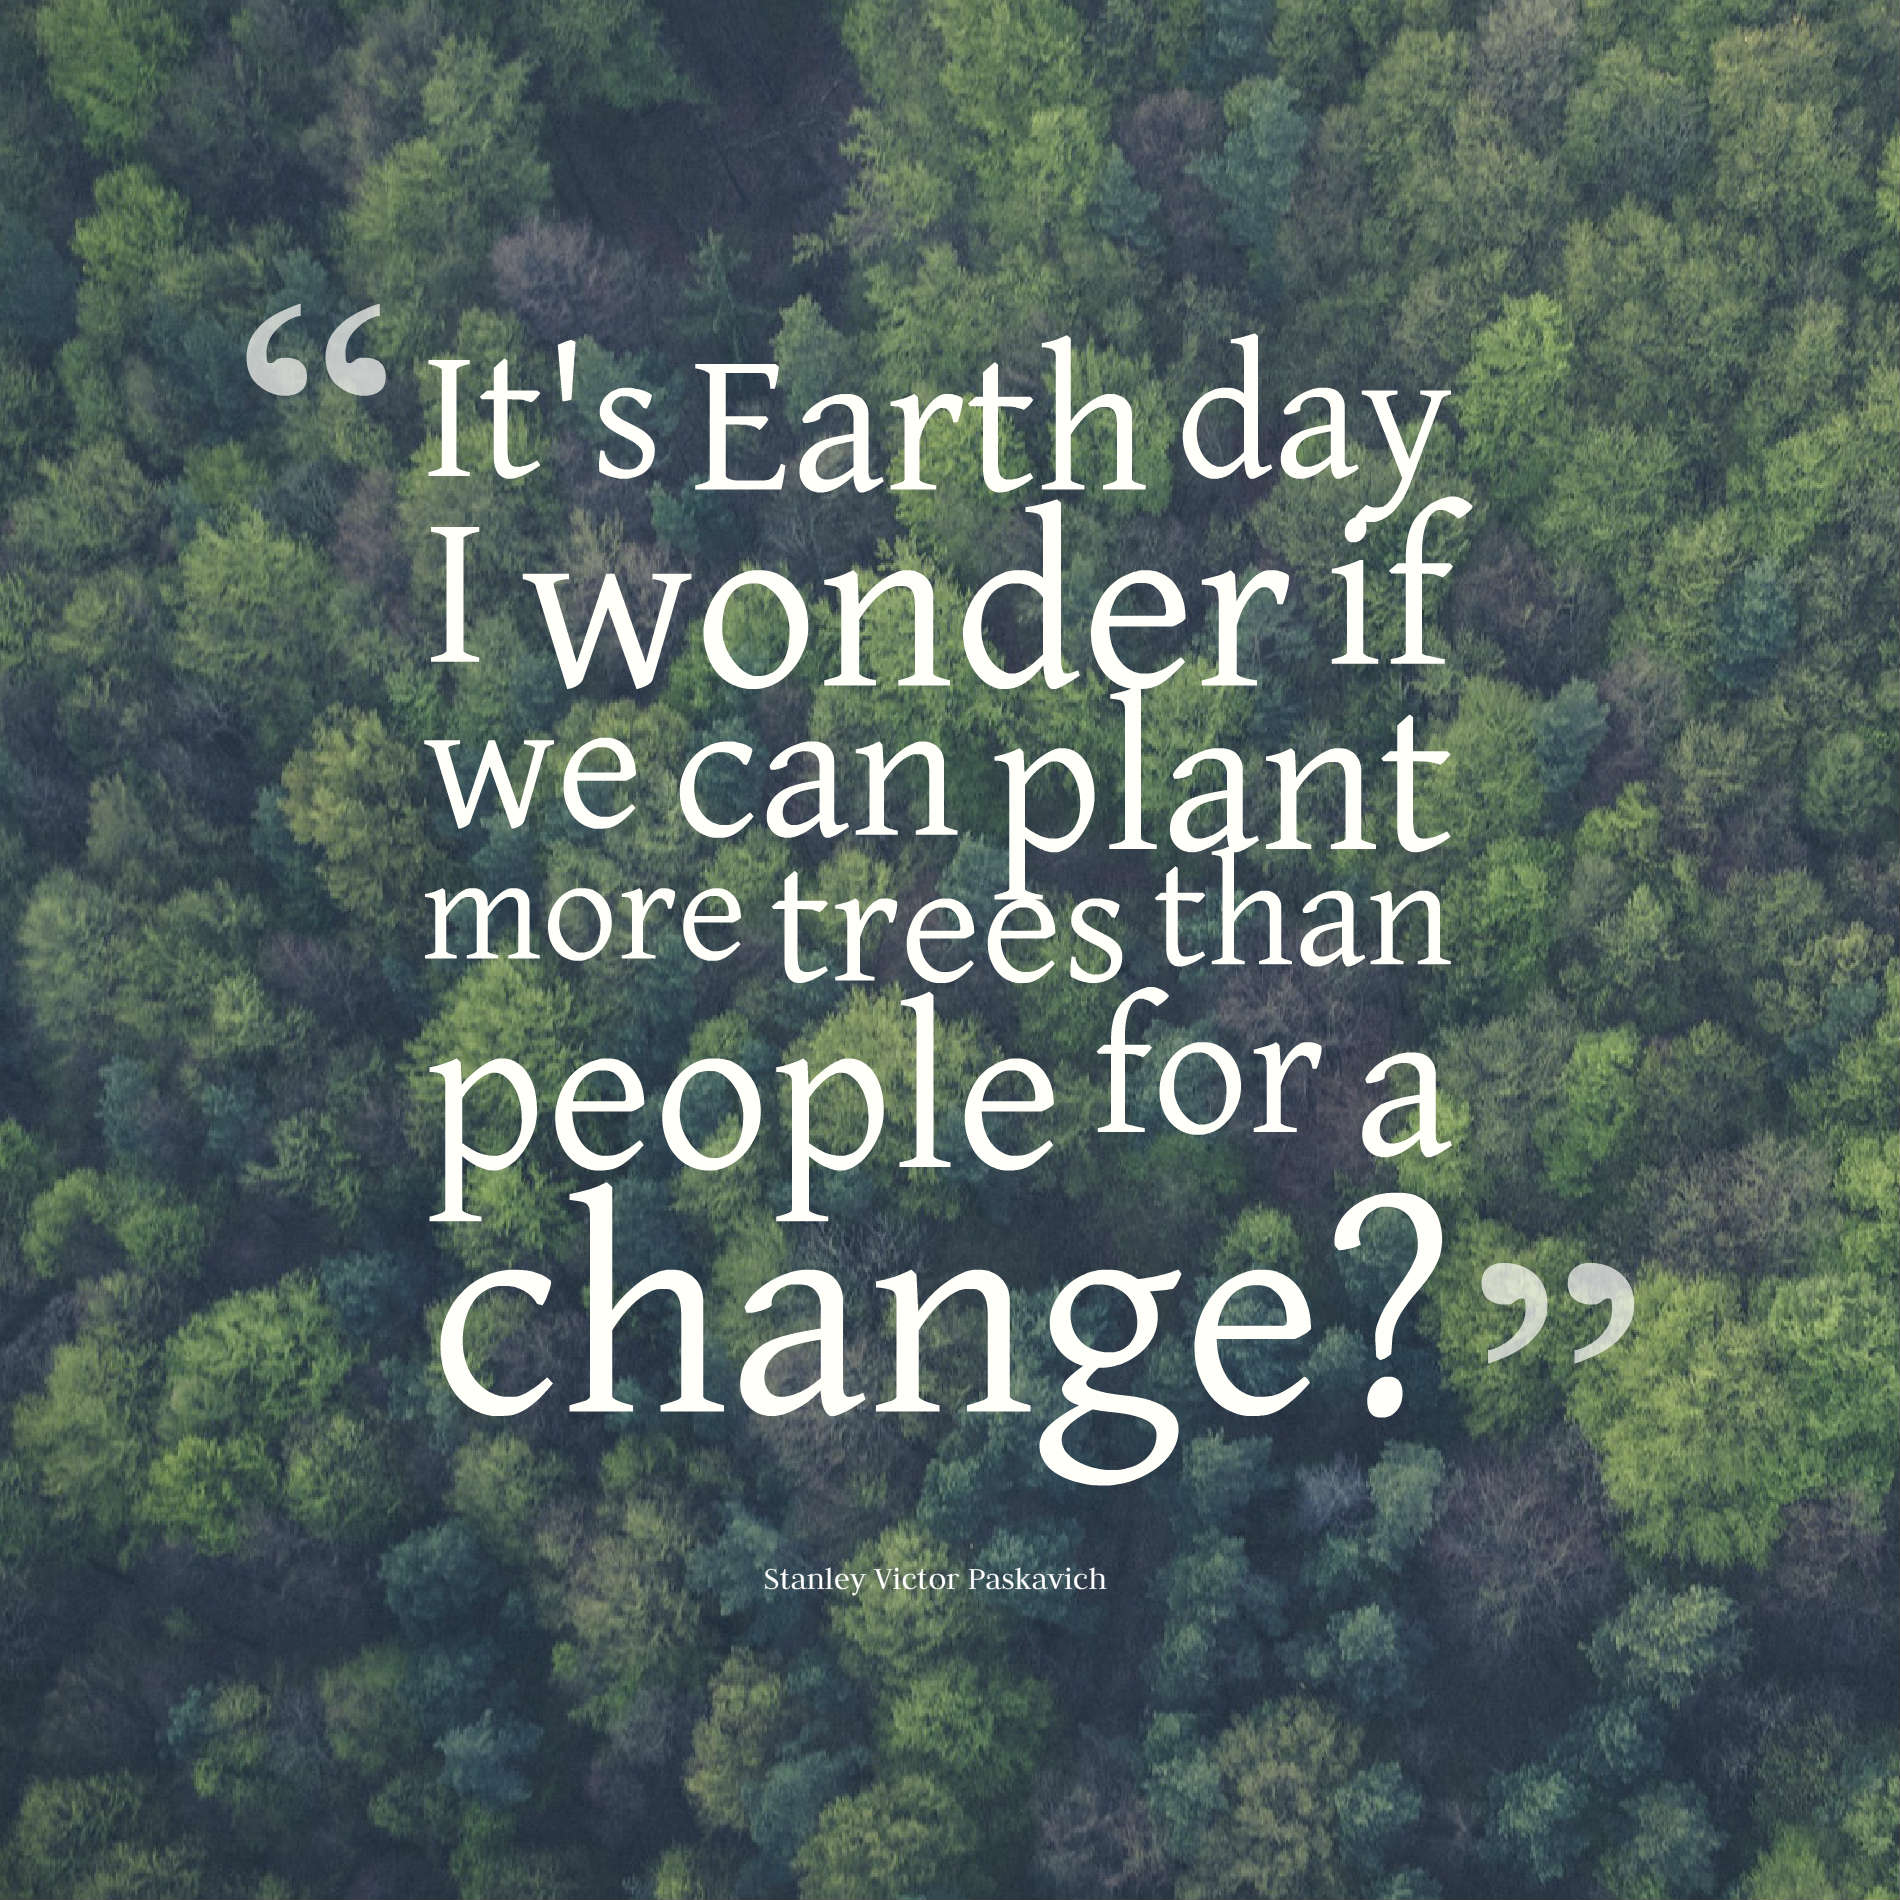 It's Earth day I wonder if we can plant more trees than people for a change